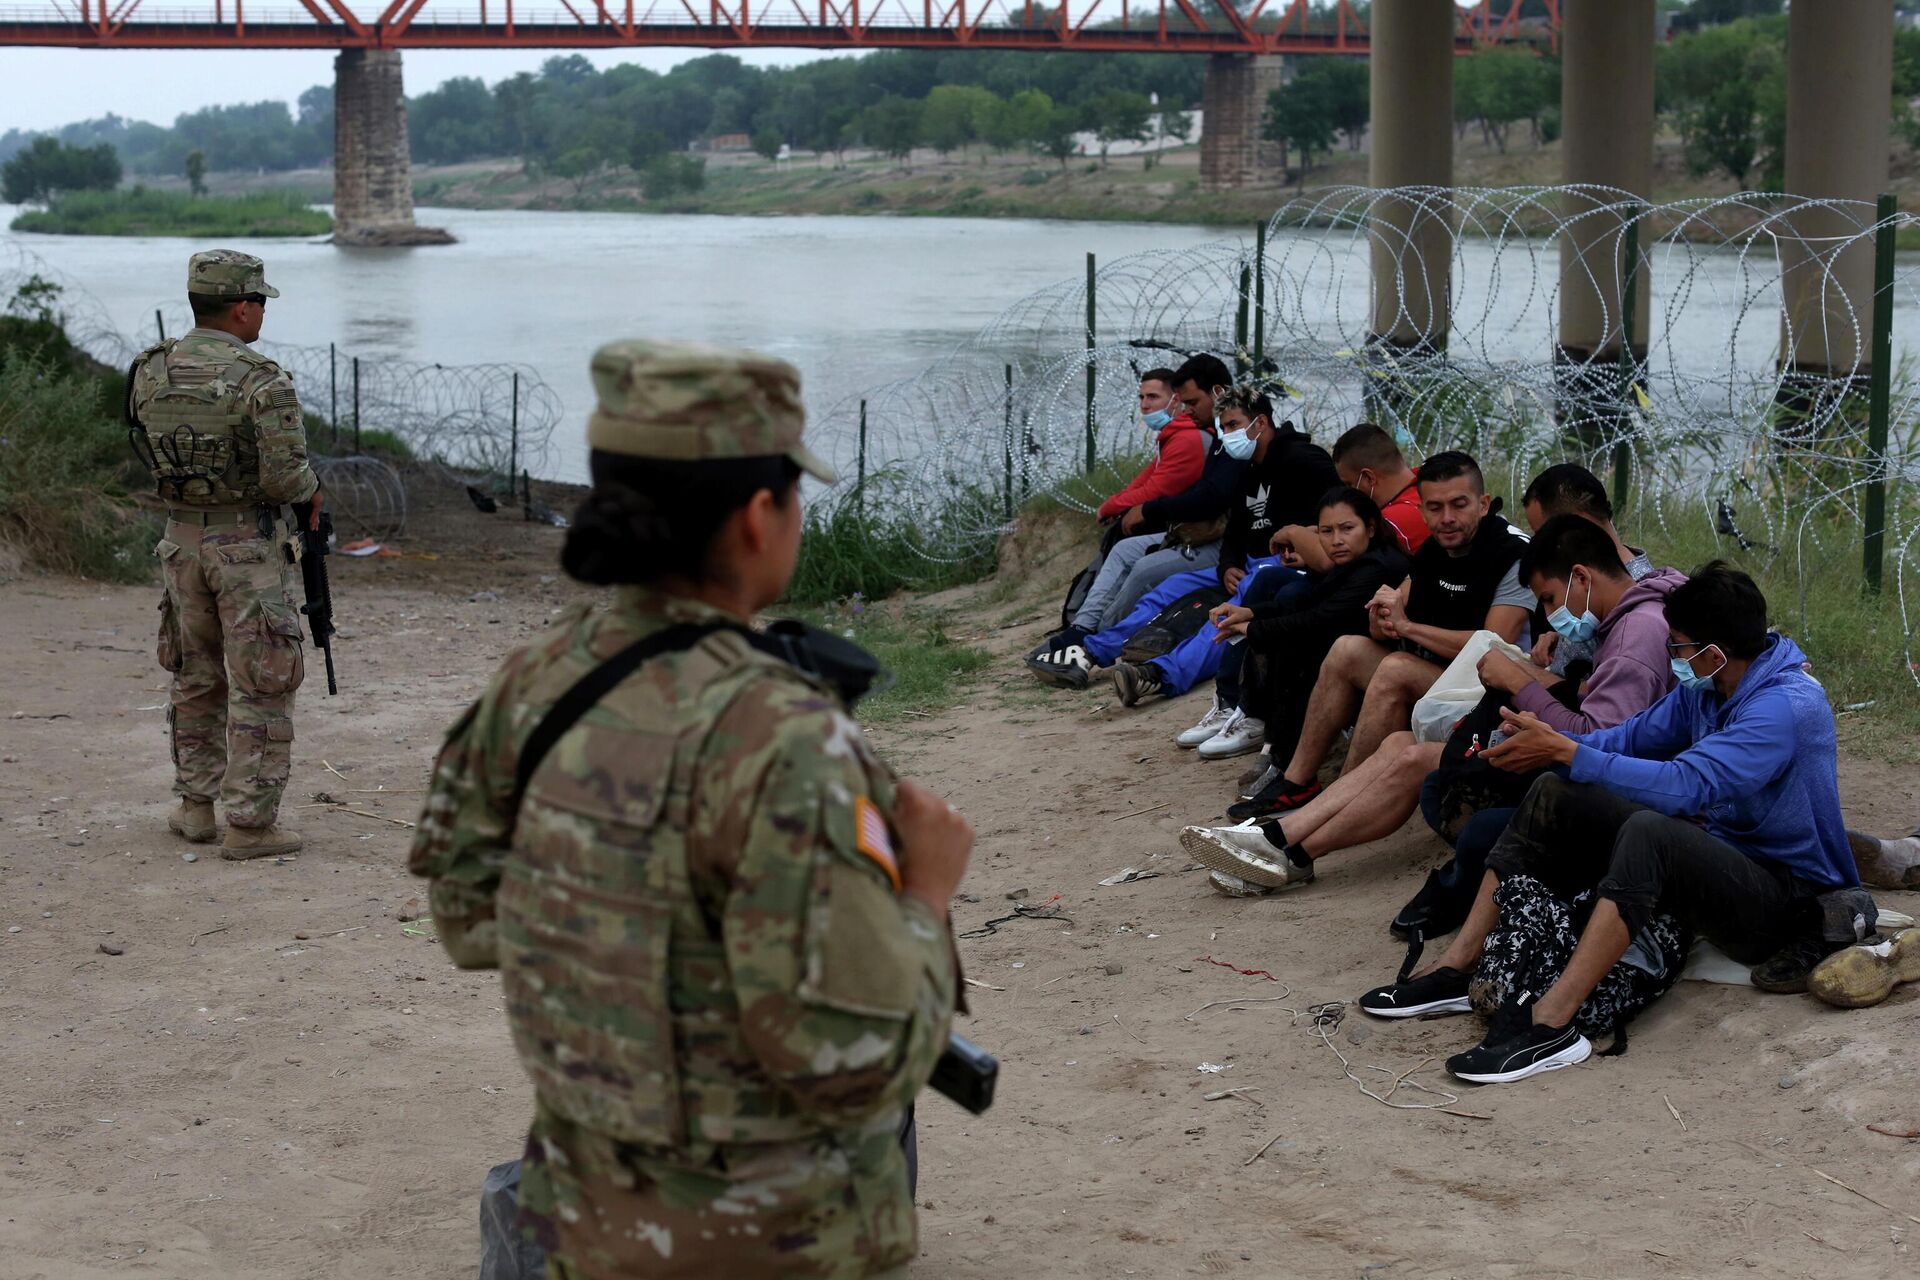 Migrants who had crossed the Rio Grande river into the U.S. are under custody of National Guard members as they await the arrival of U.S. Border Patrol agents in Eagle Pass, Texas, Friday, May 20, 2022 - Sputnik International, 1920, 10.07.2022